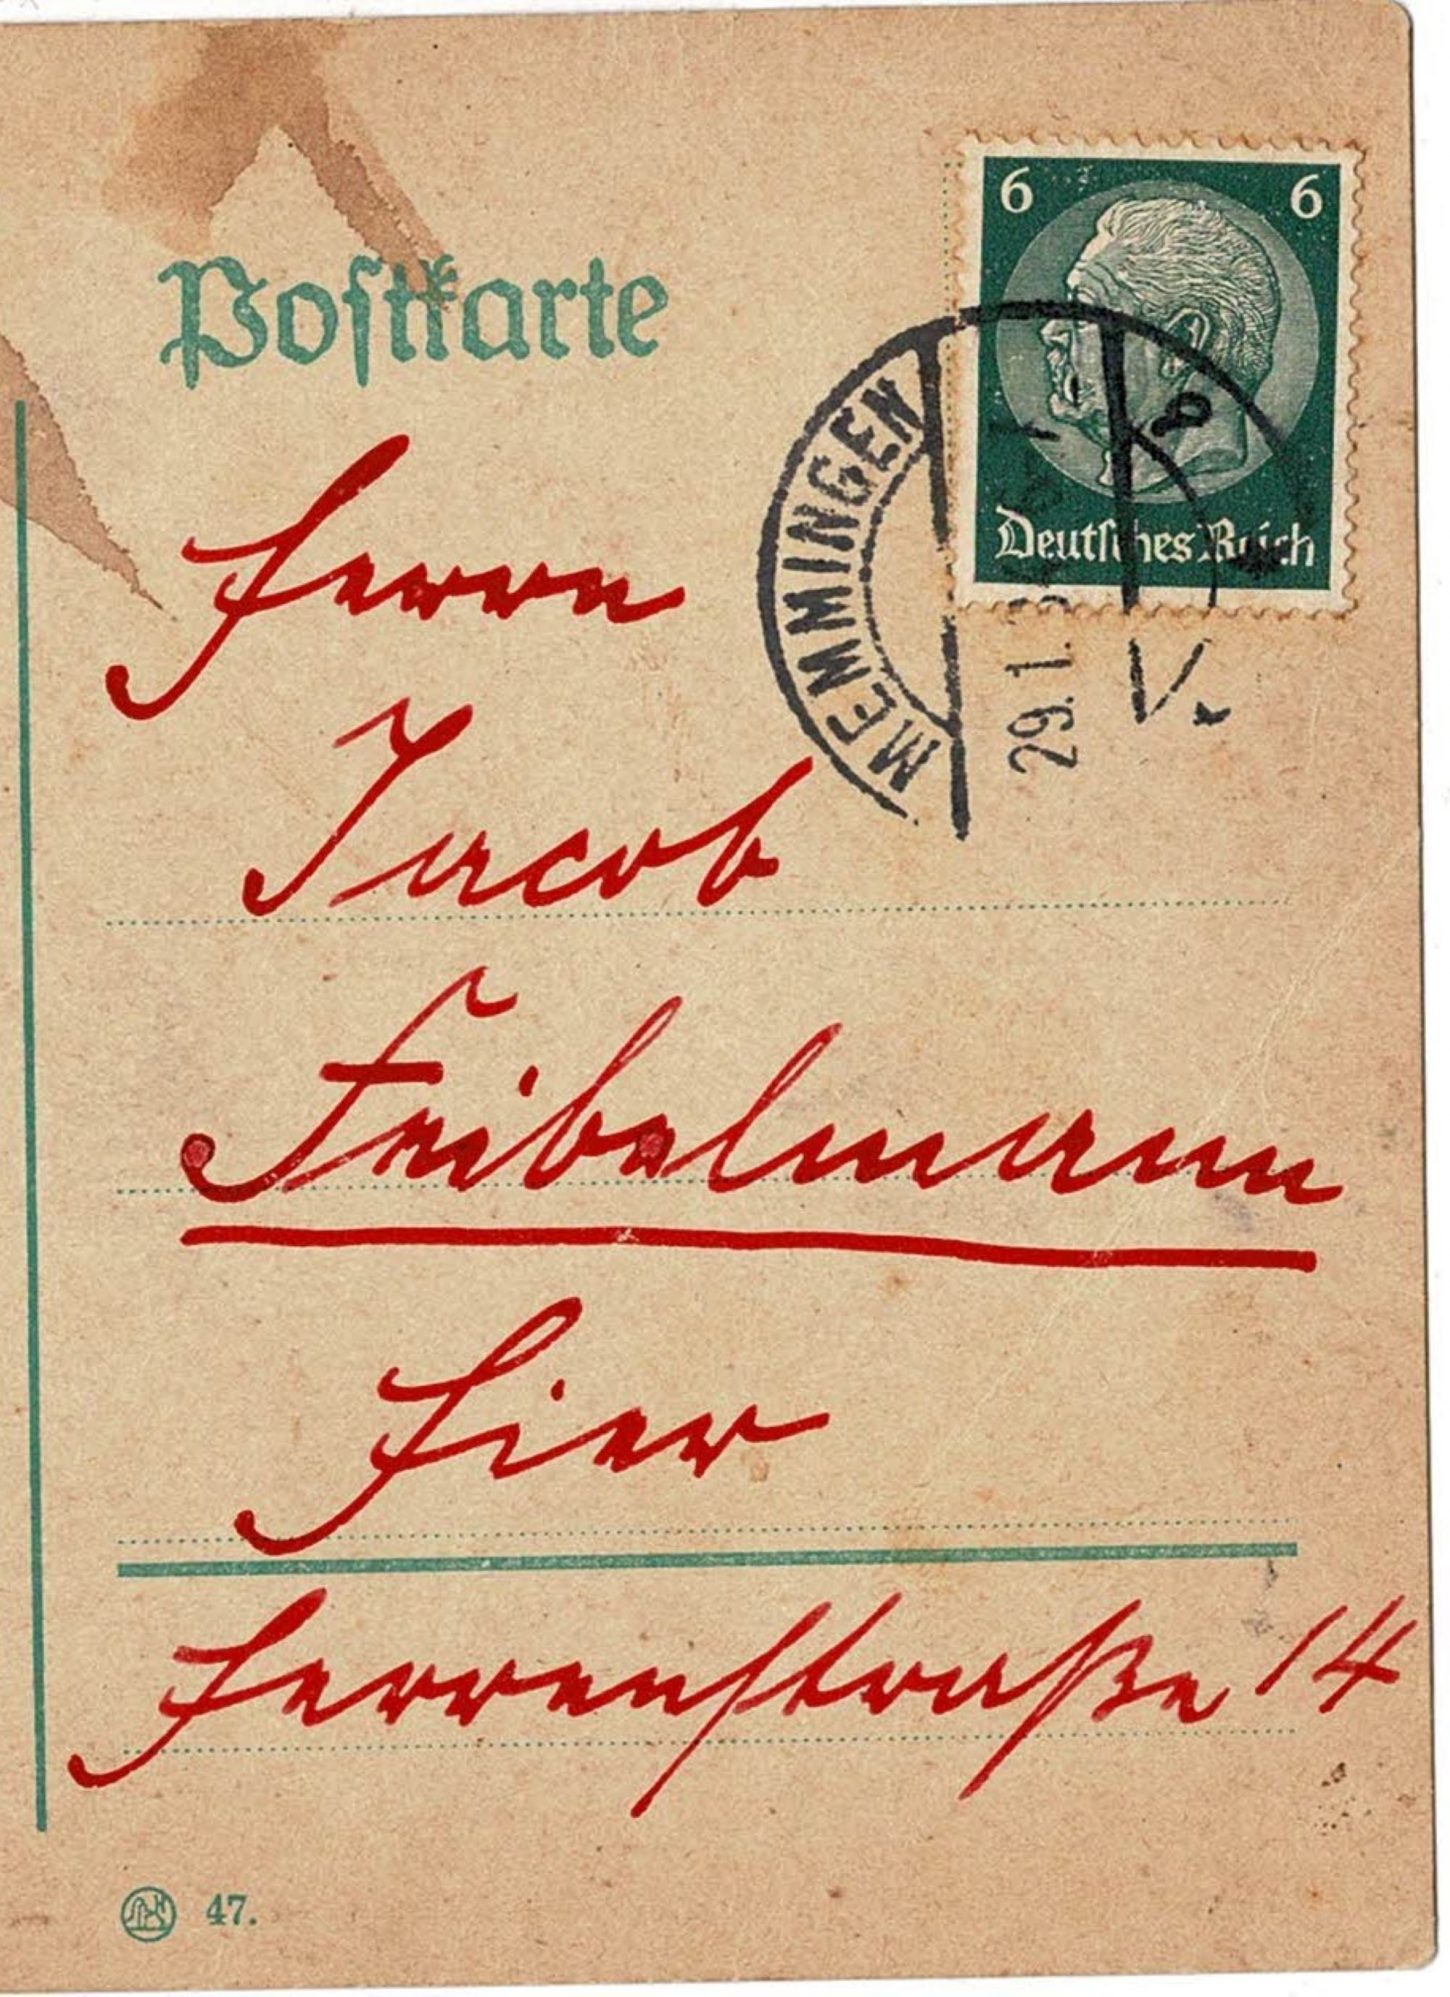 Detail of a threatening card to Jakob Feibelmann with red ink.